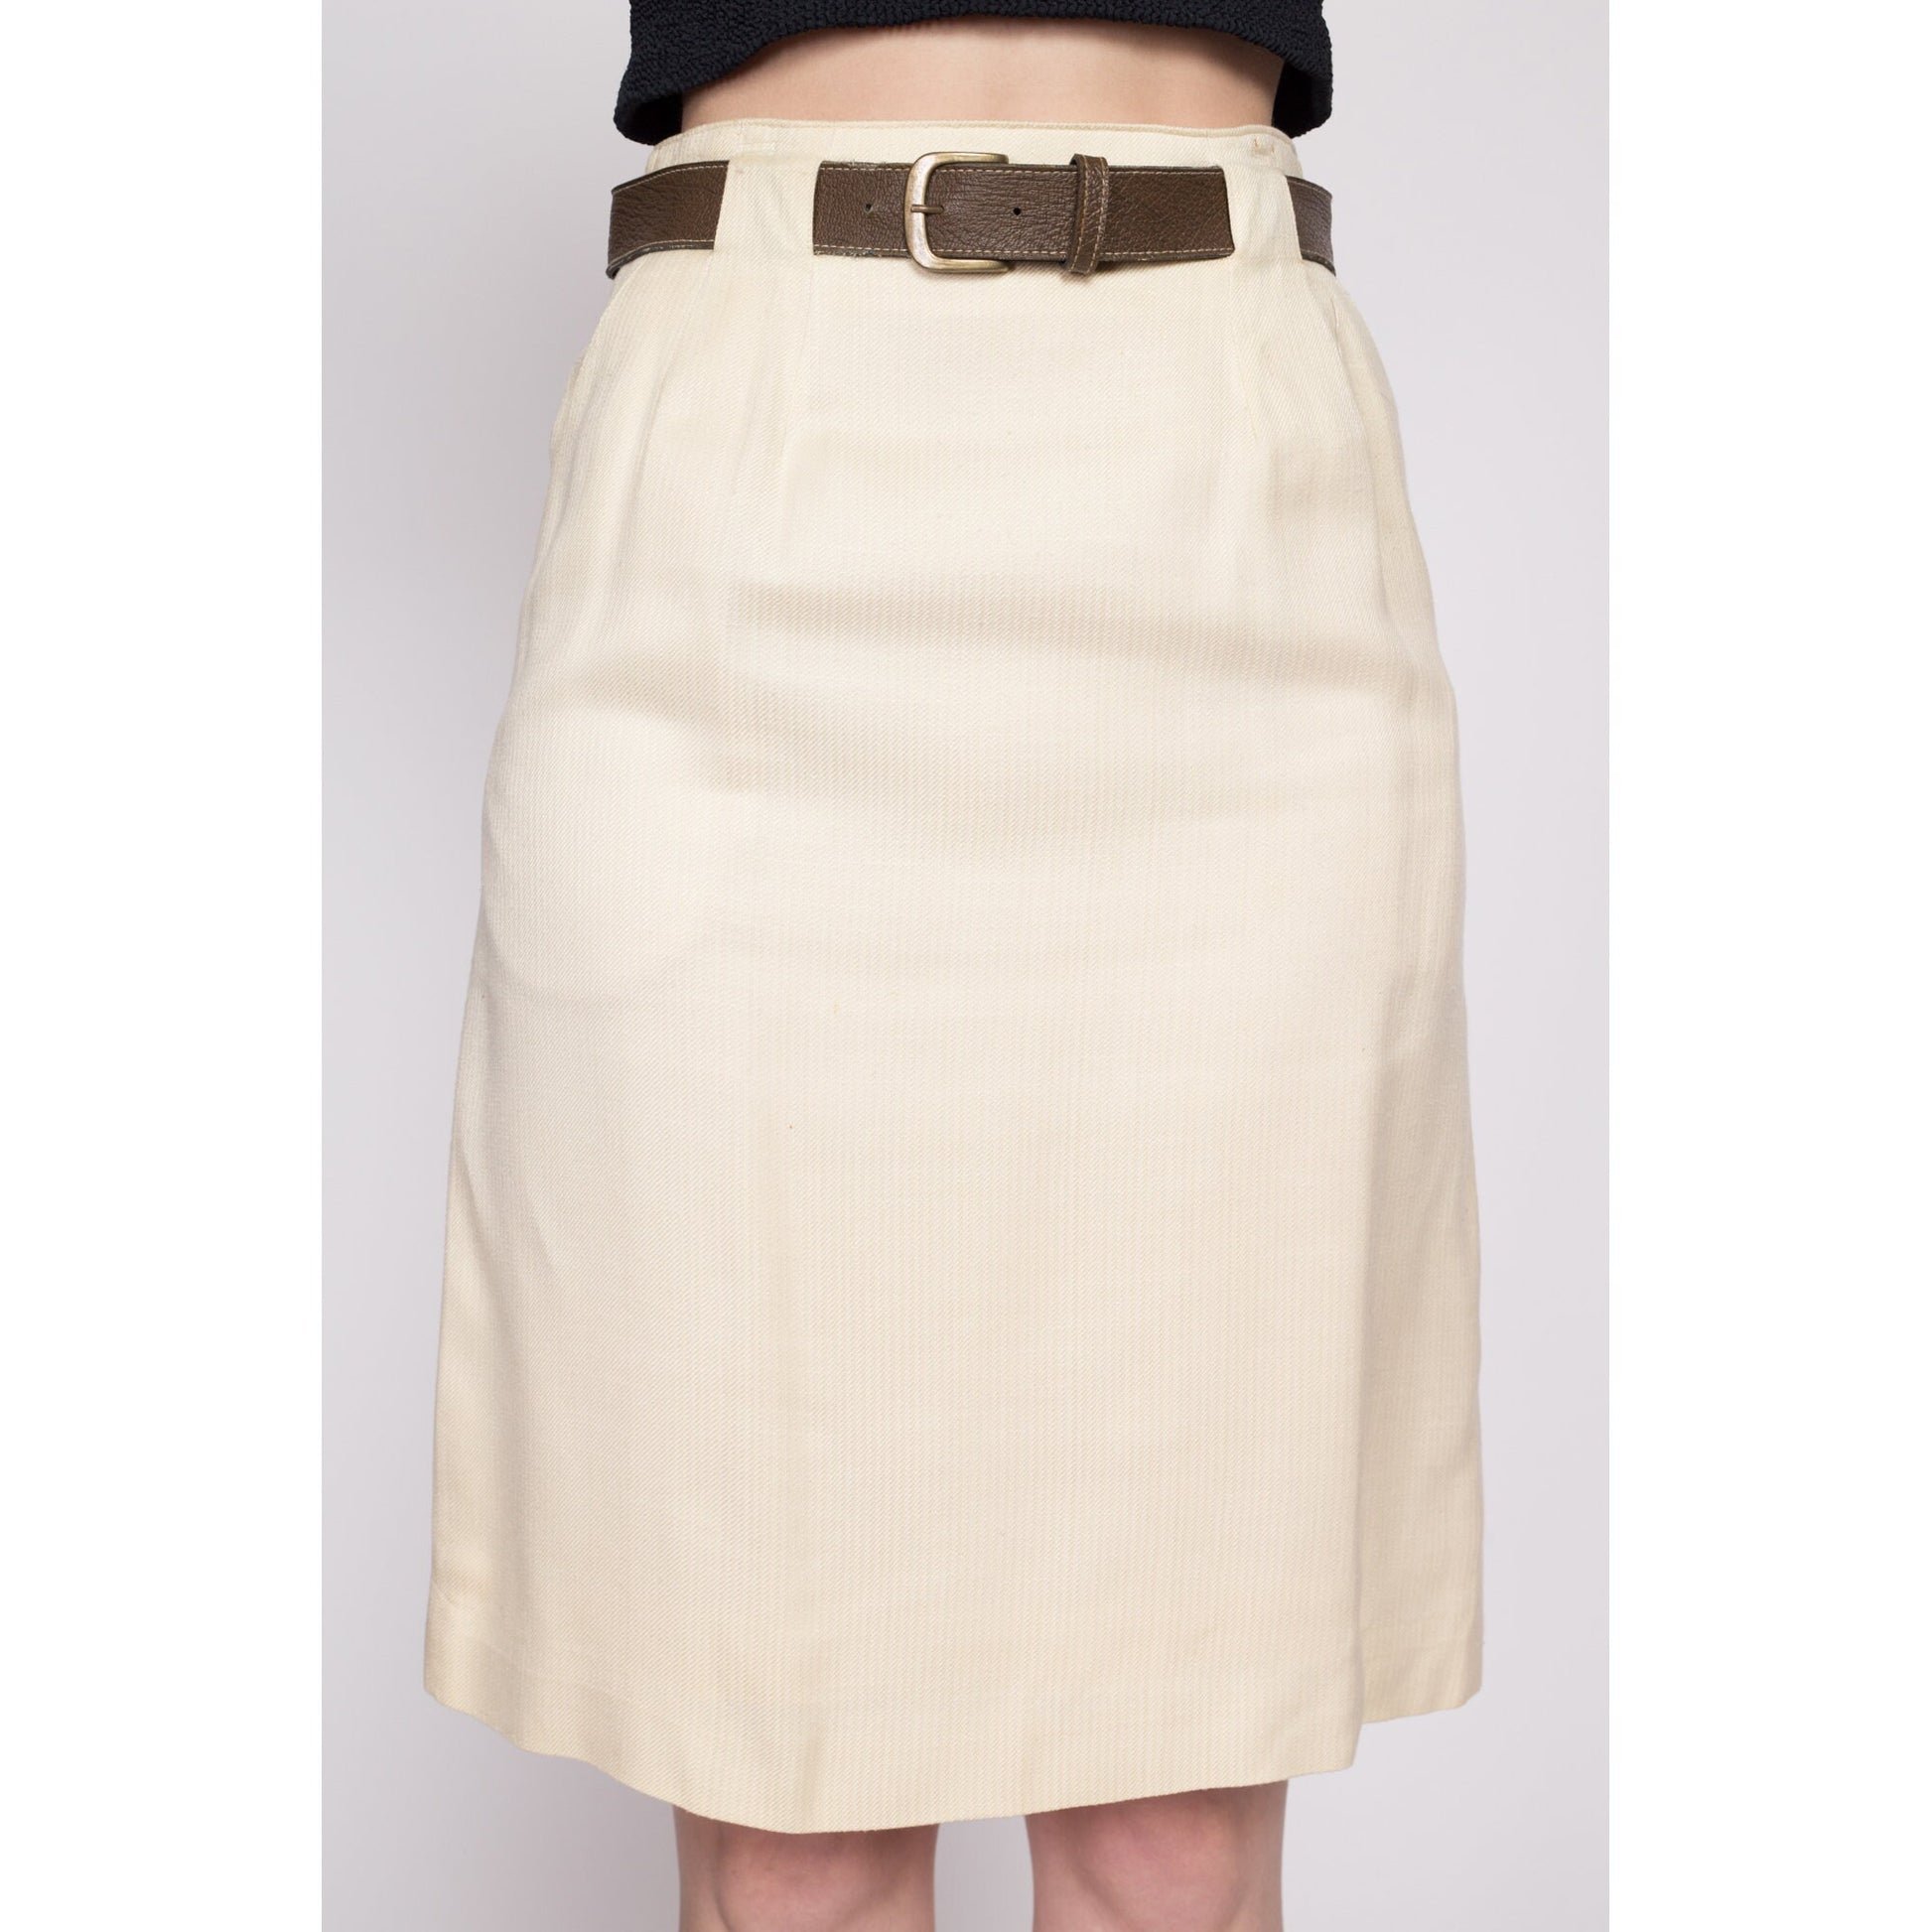 70s 80s Evan Picone Belted Skirt - Extra Small, 24.5 – Flying Apple Vintage